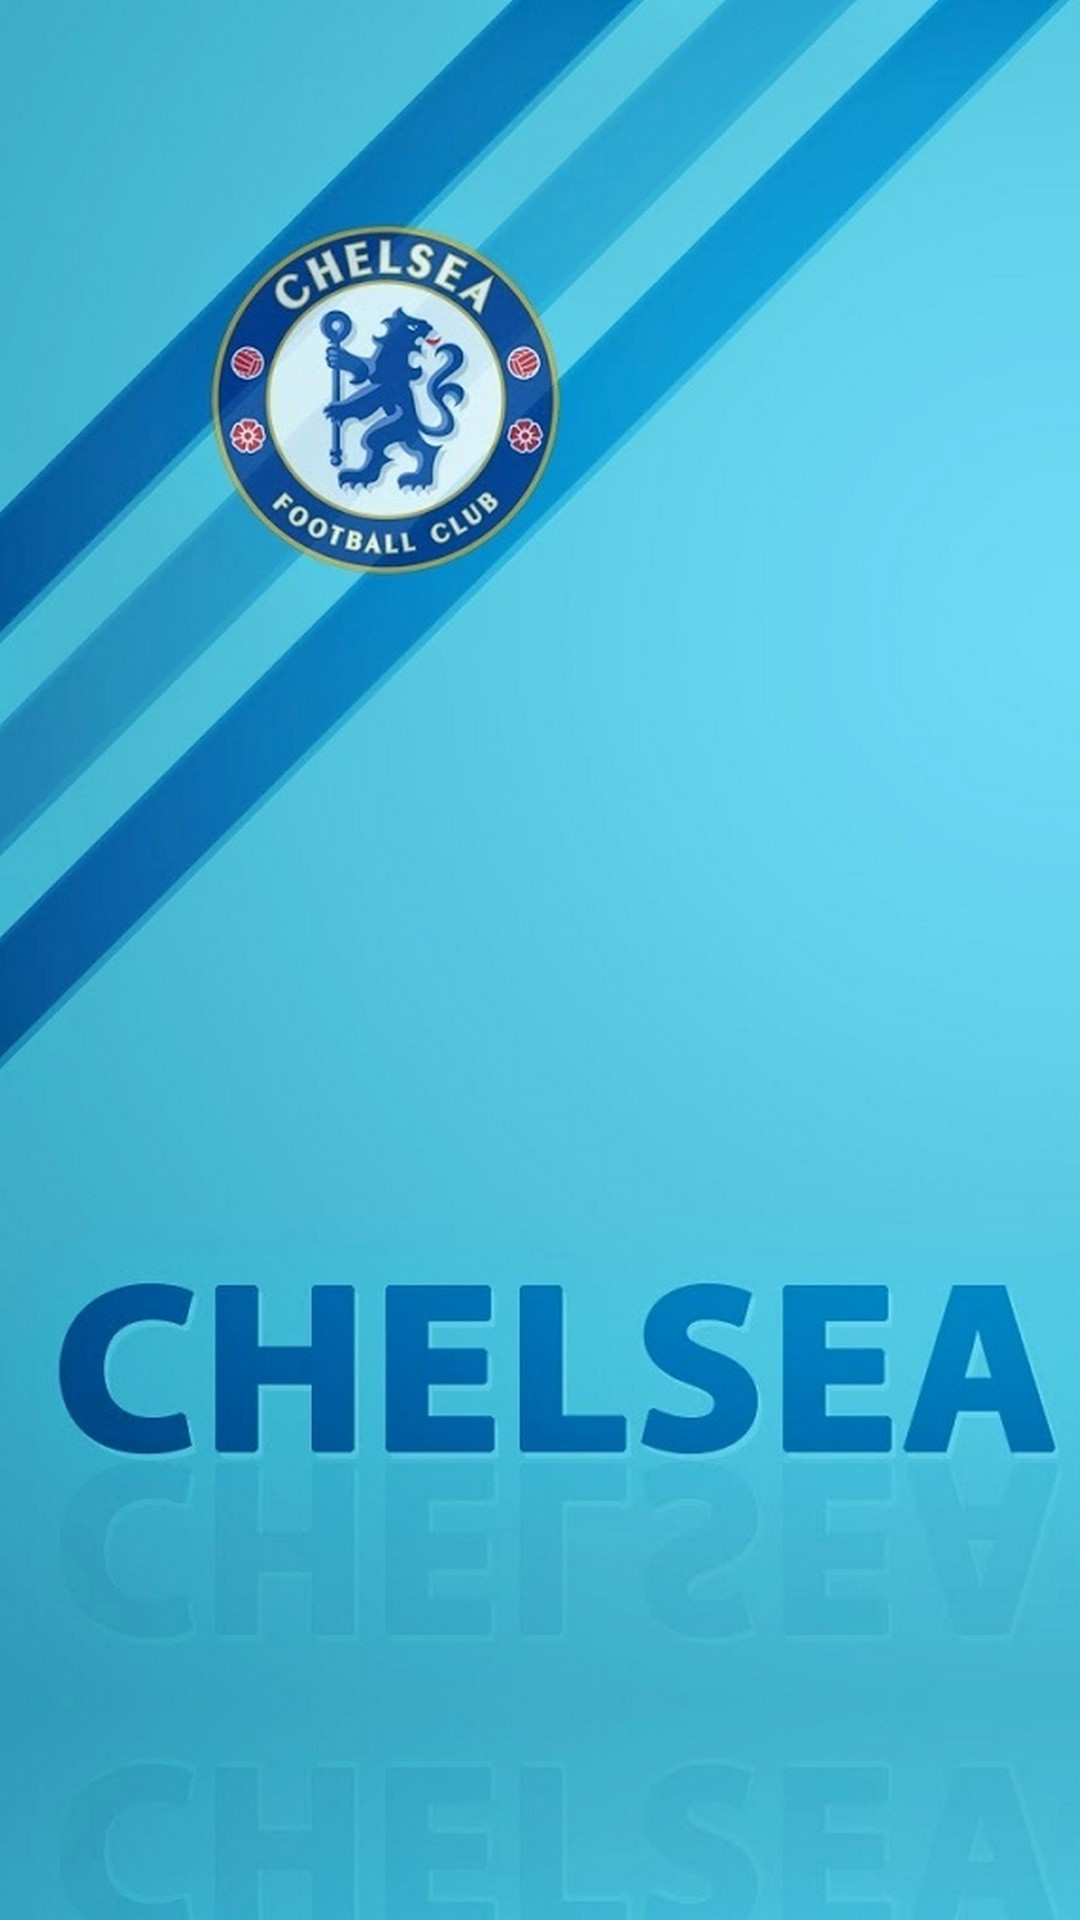 Chelsea FC HD Wallpaper For iPhone With Resolution 1080X1920 pixel. You can make this wallpaper for your Mac or Windows Desktop Background, iPhone, Android or Tablet and another Smartphone device for free